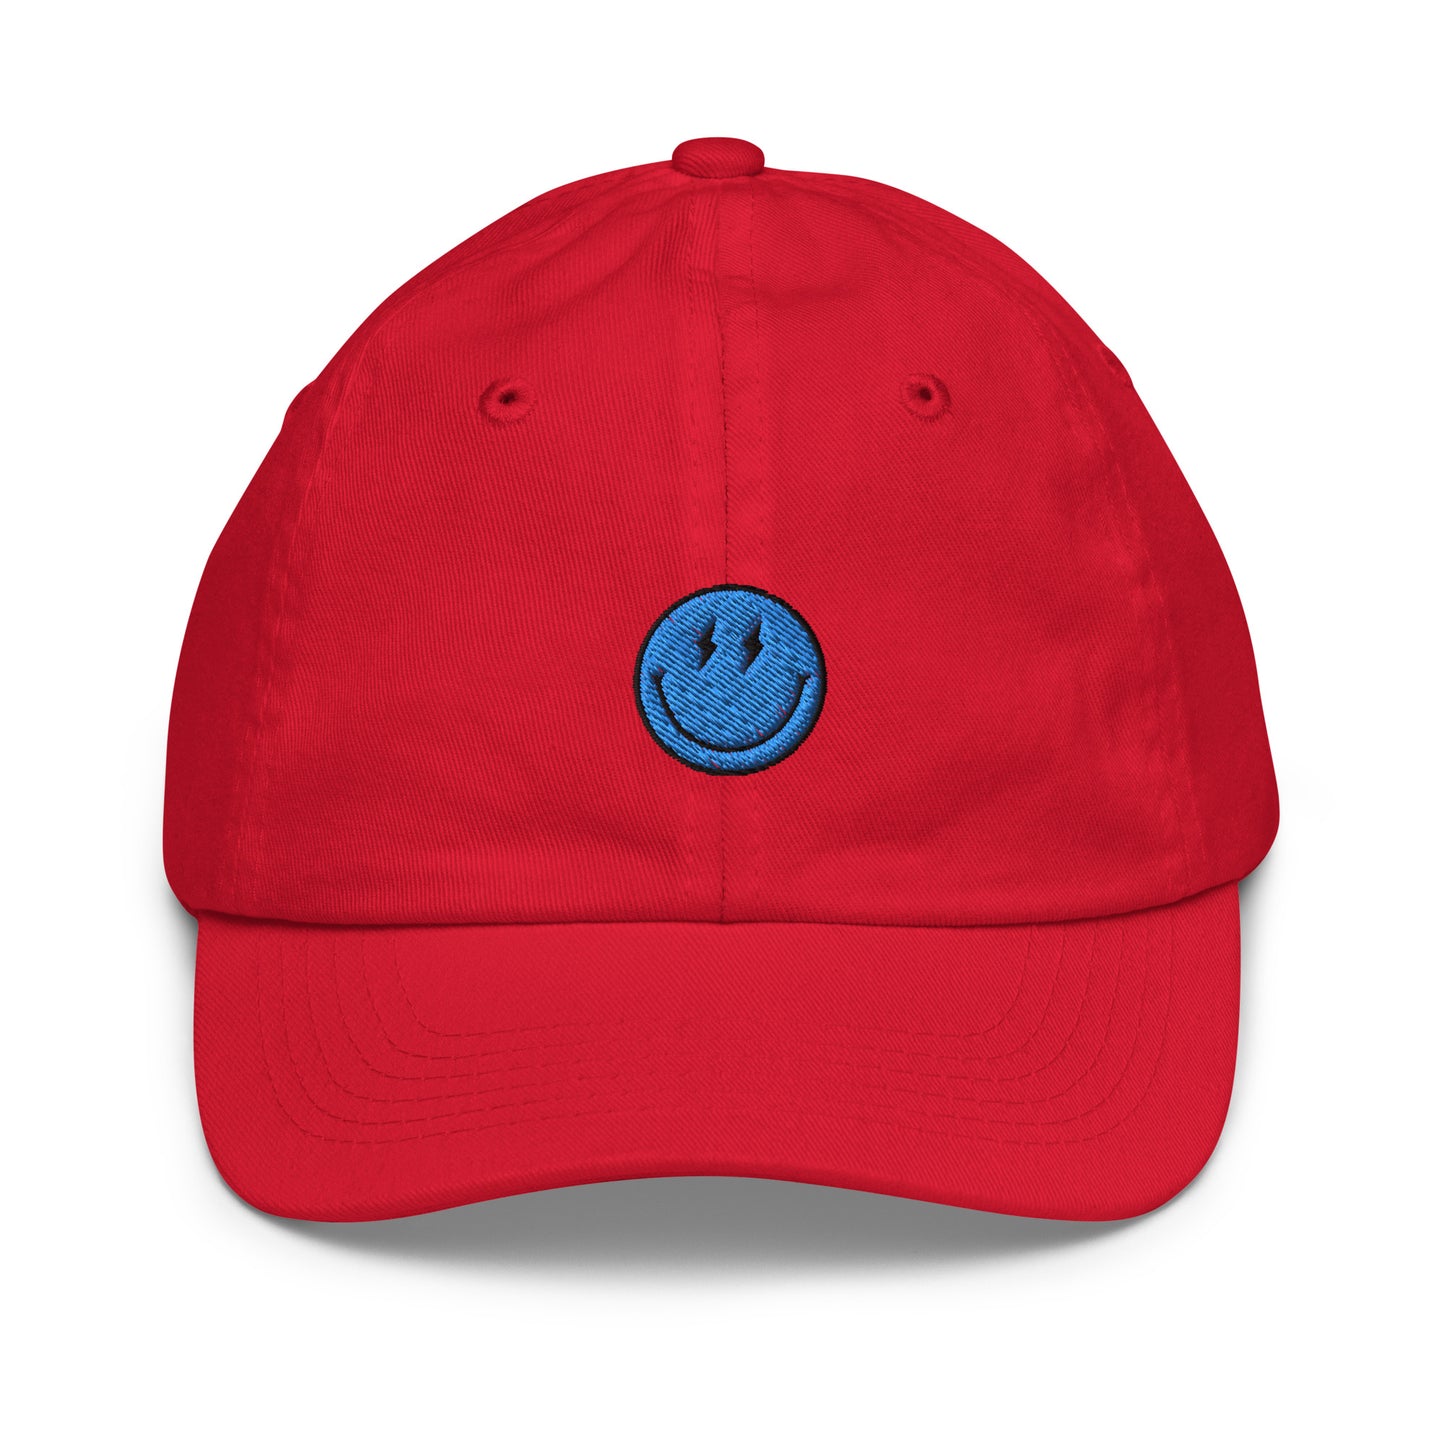 Blue smile youth hat